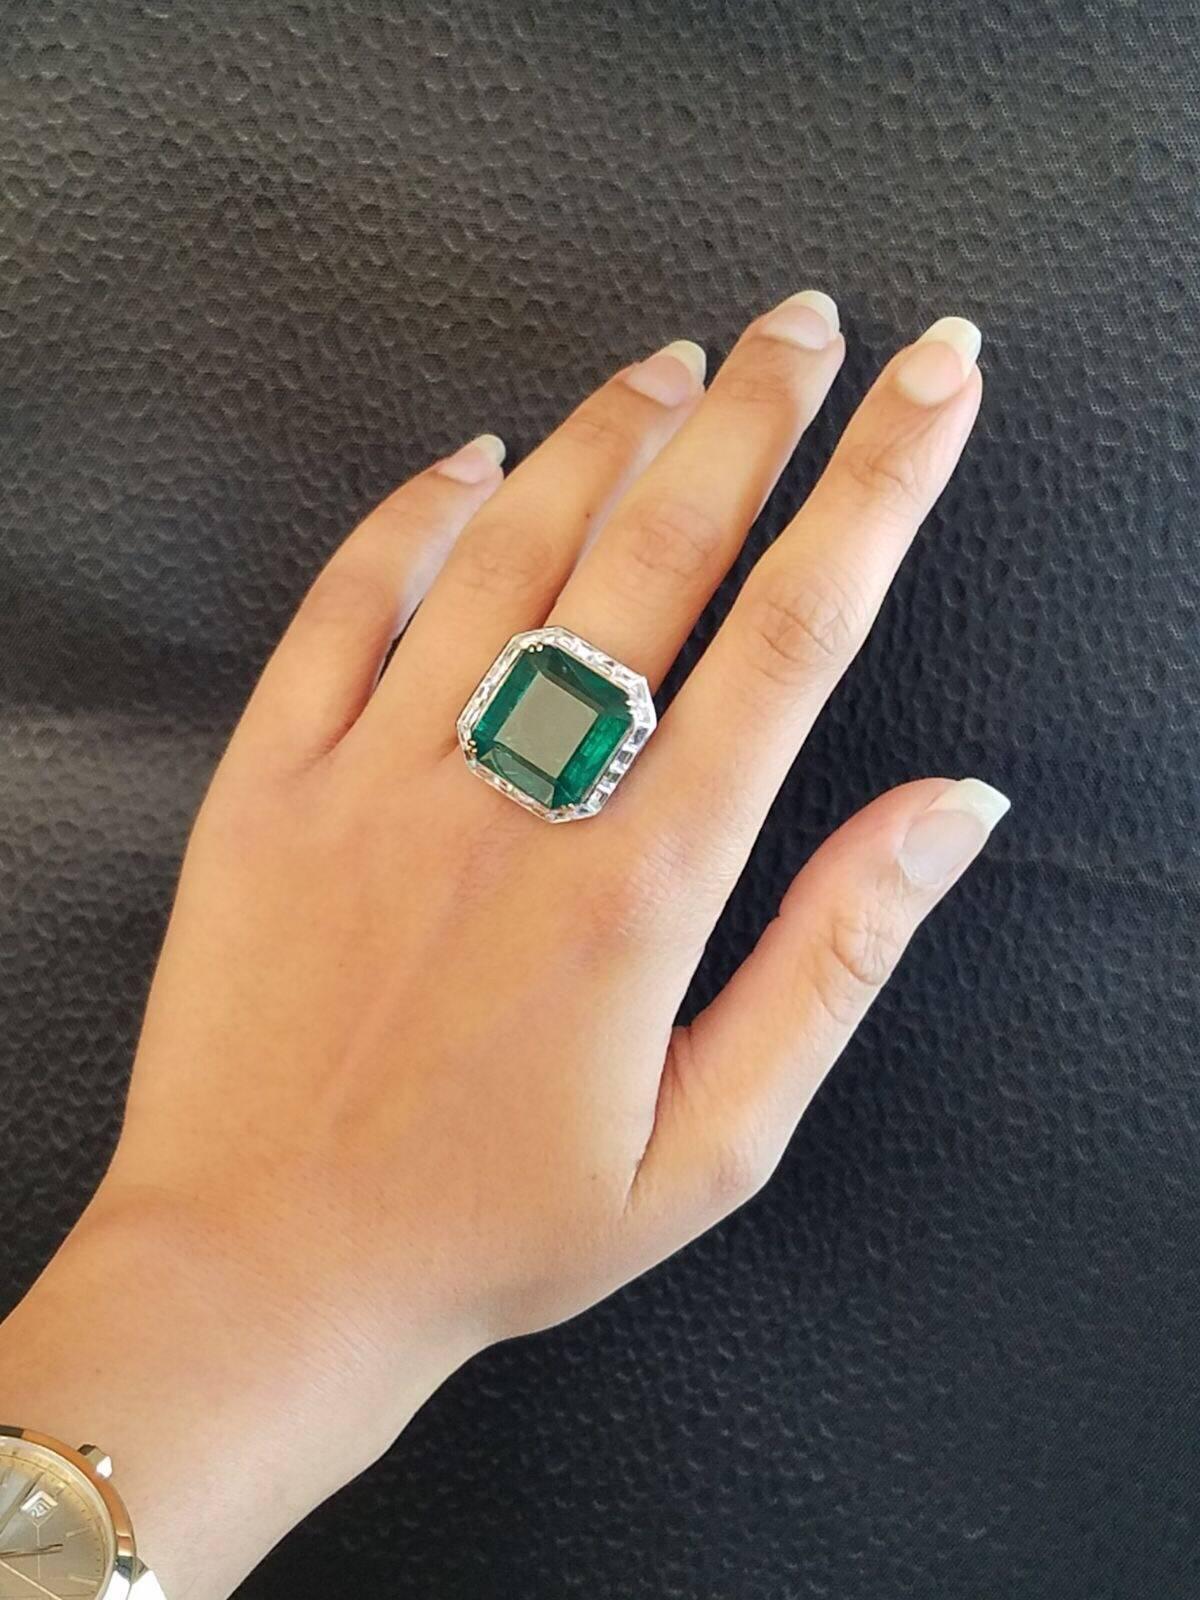 Statement  Zambian Emerald ring surrounded by Diamond baguettes  set on 18K White Gold band.

Centre Stone Details:  
Stone: Emerald
Cut: Emerald
Weight: 24.66 carat

Diamond Details:
Cut: Baguette
Total Carat Weight: 2.27 carat 
Quality: VS/SI ,